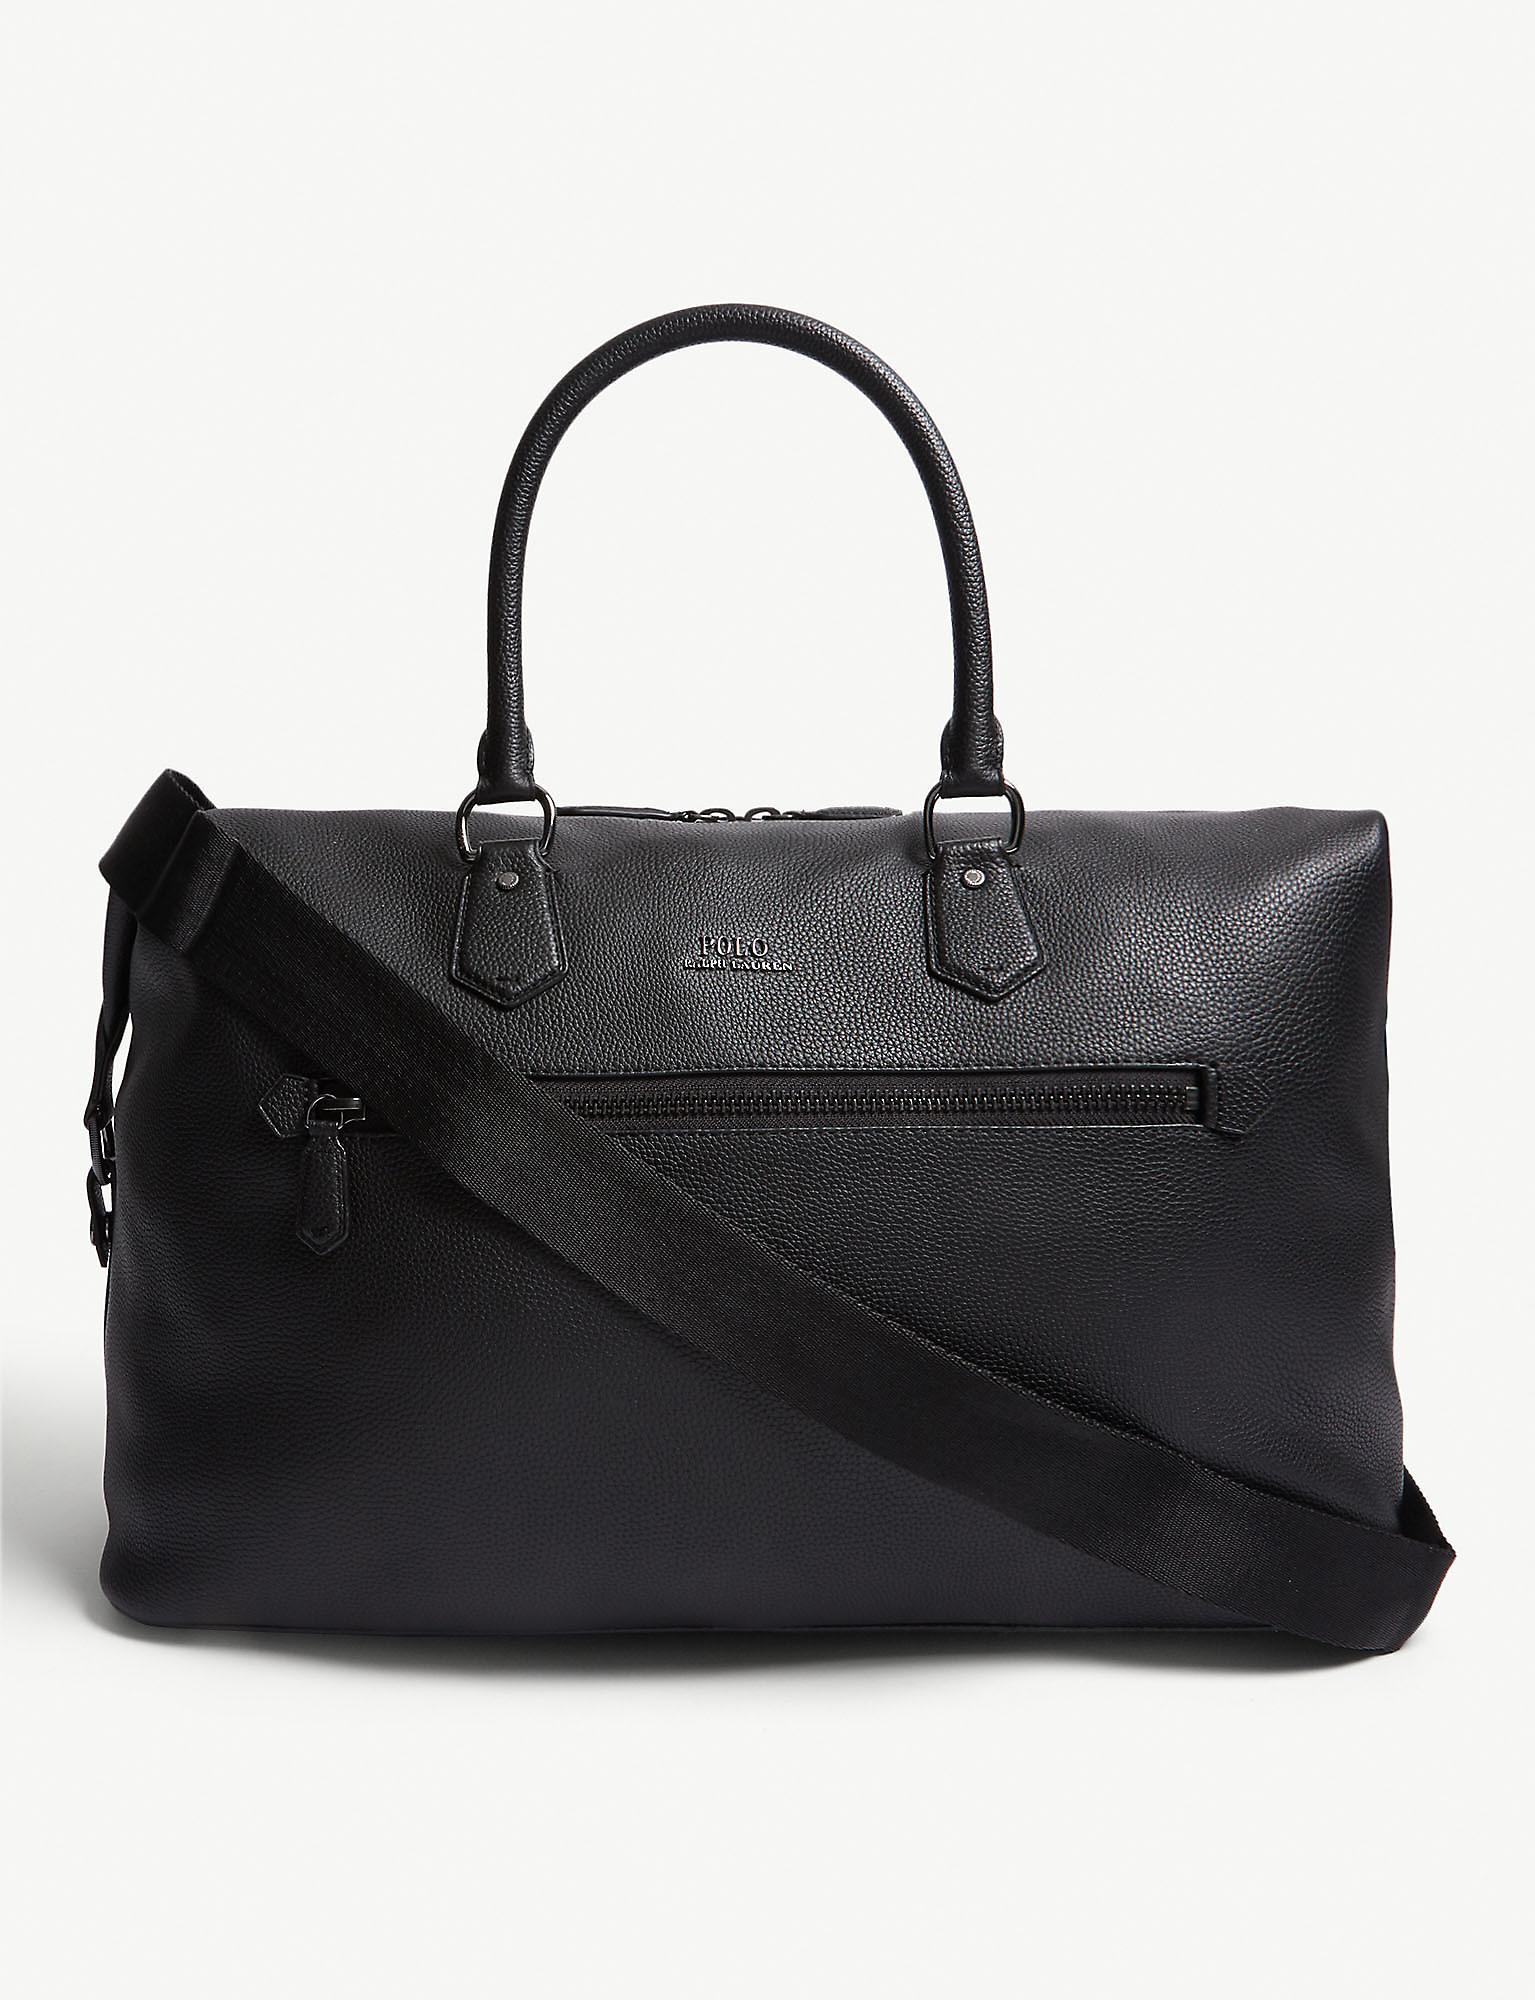 Polo Ralph Lauren Pebbled Leather Duffle Bag in Black for Men - Lyst